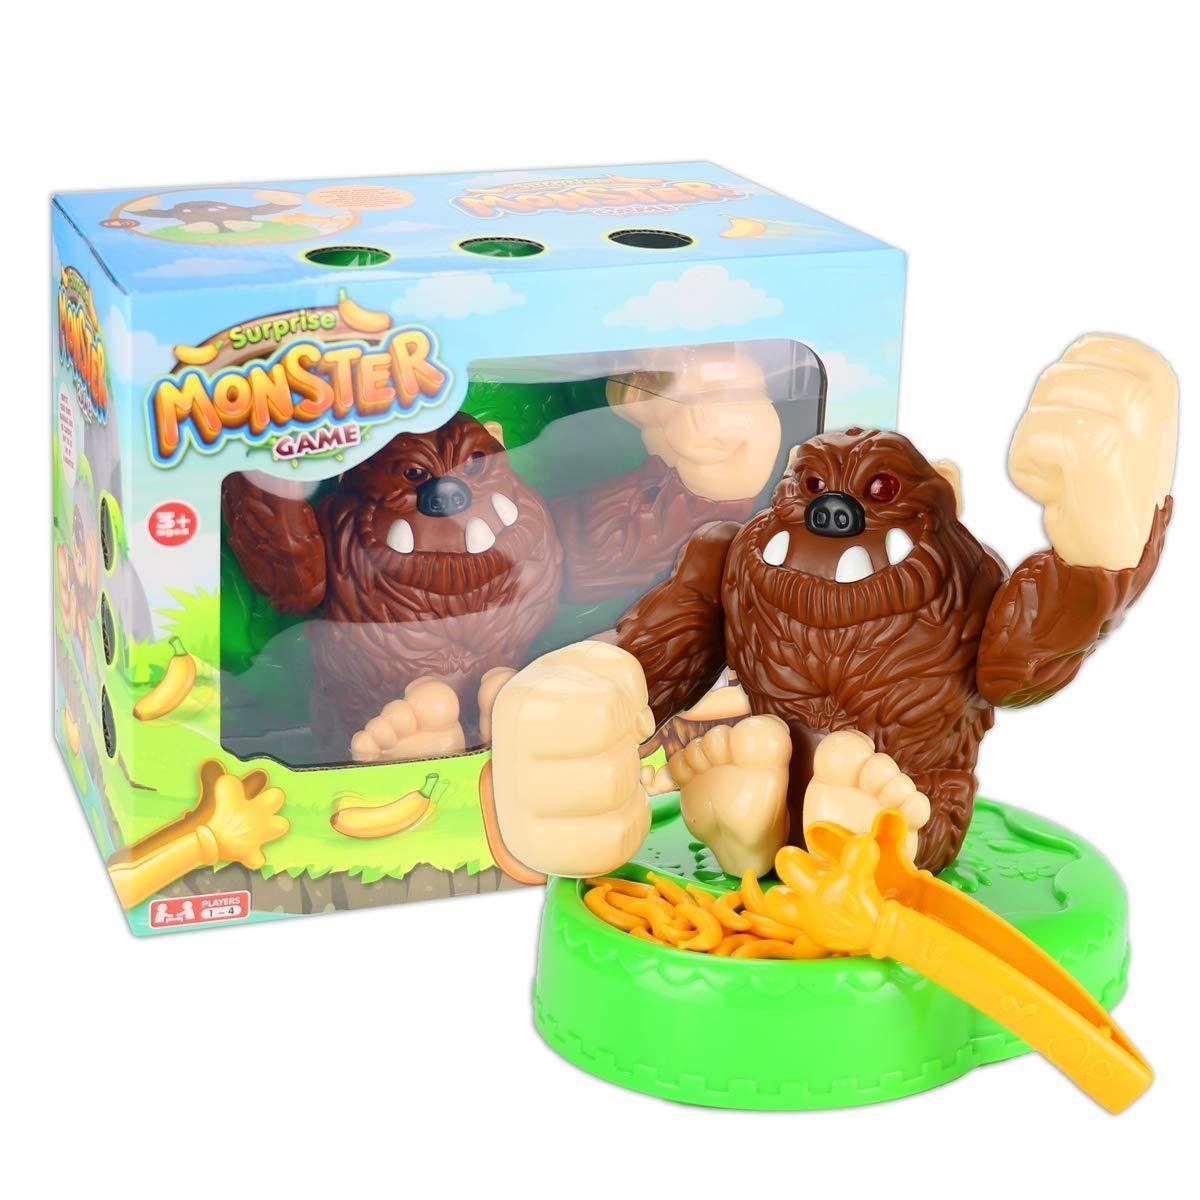 Steal The Bananas from Gorilla Monster Game - BumbleToys - 5-7 Years, Activity & Amusement, Toy House, Unisex